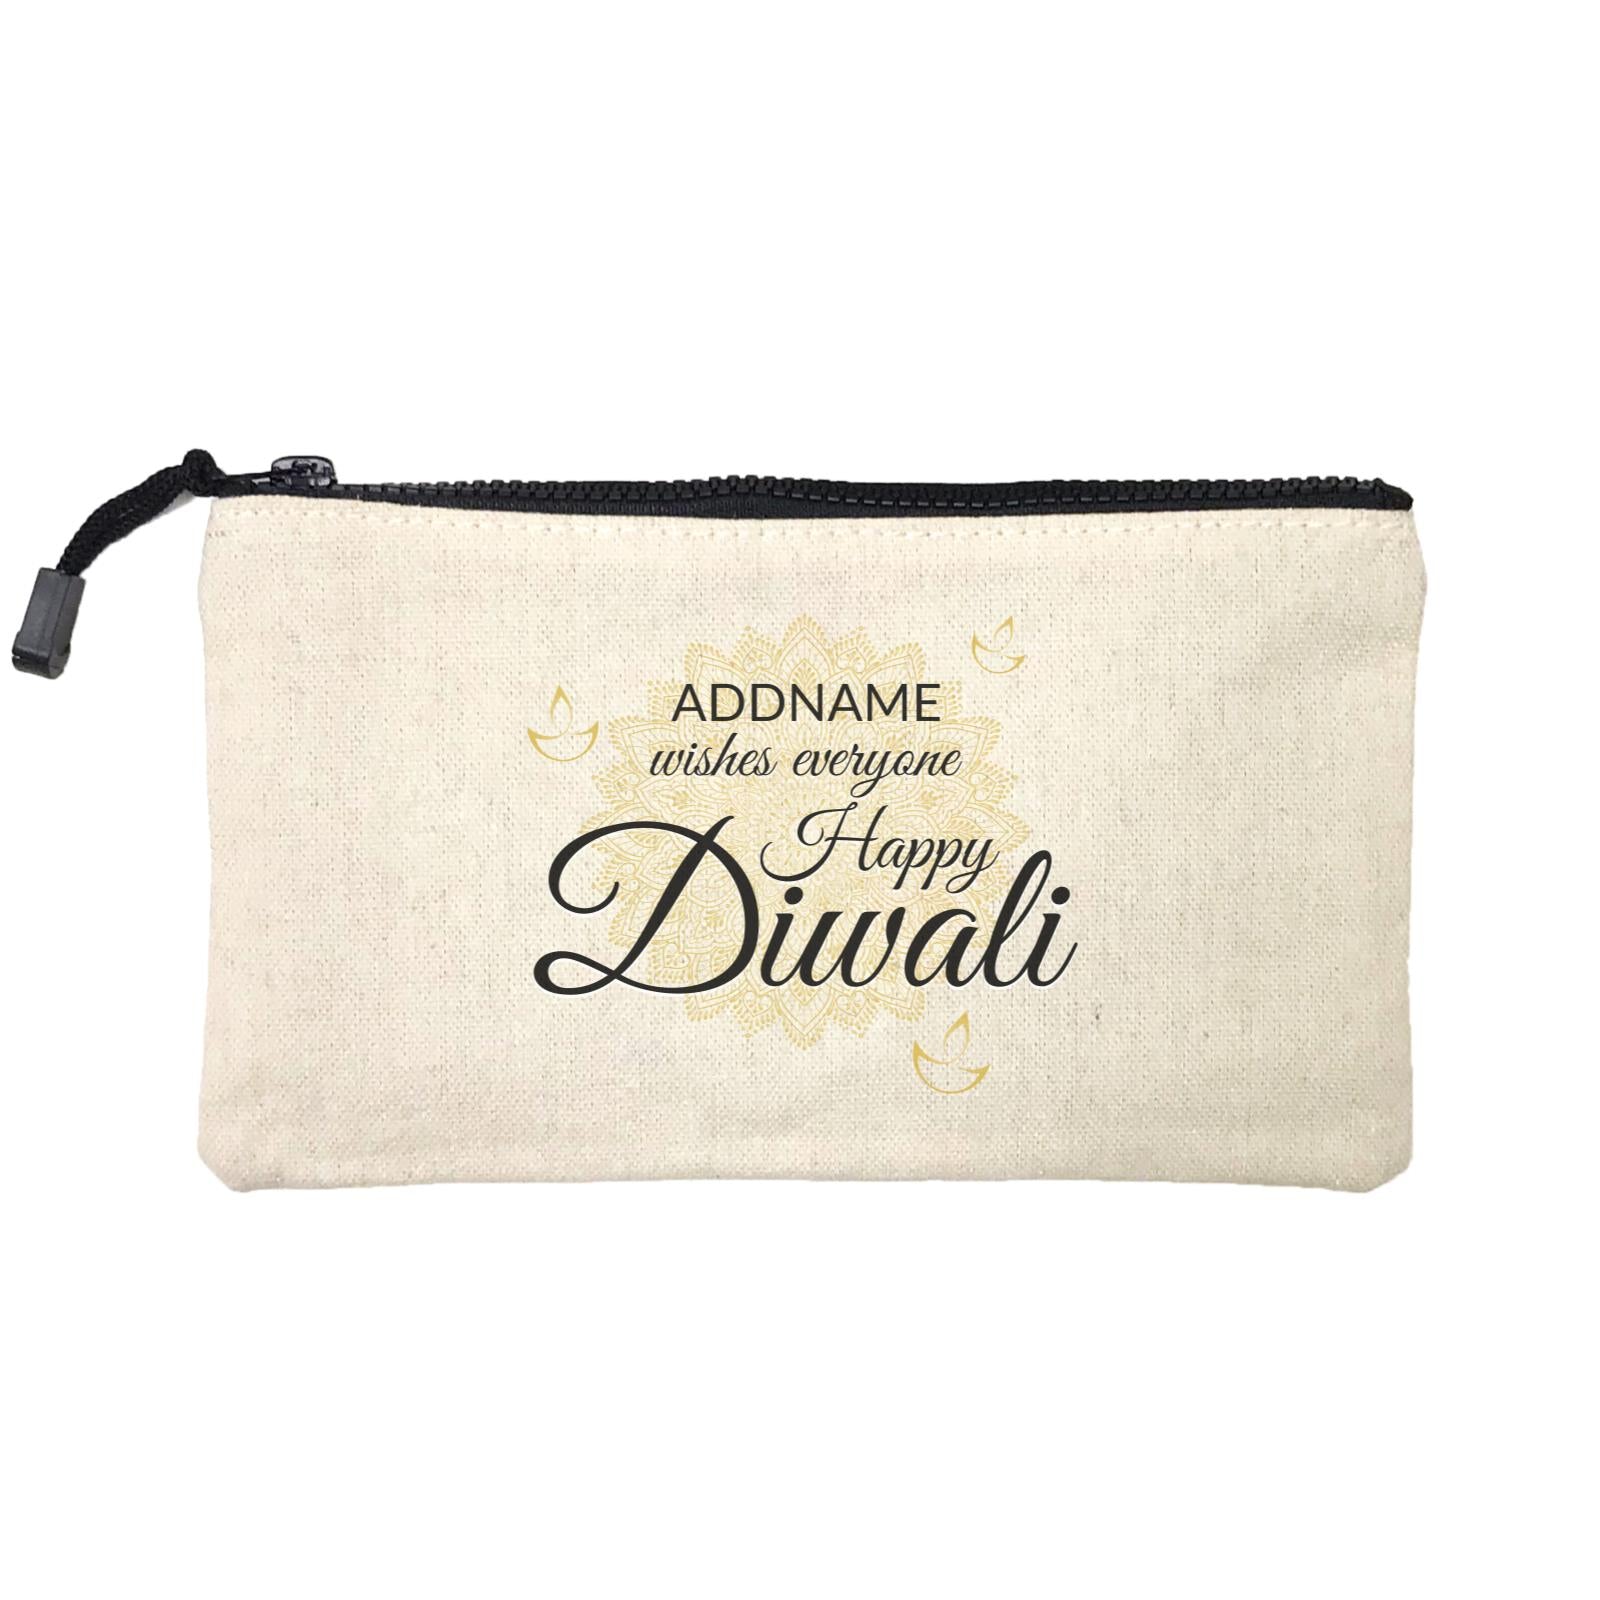 Addname Wishes Everyone Happy Diwali with Mandala Mini Accessories Stationery Pouch